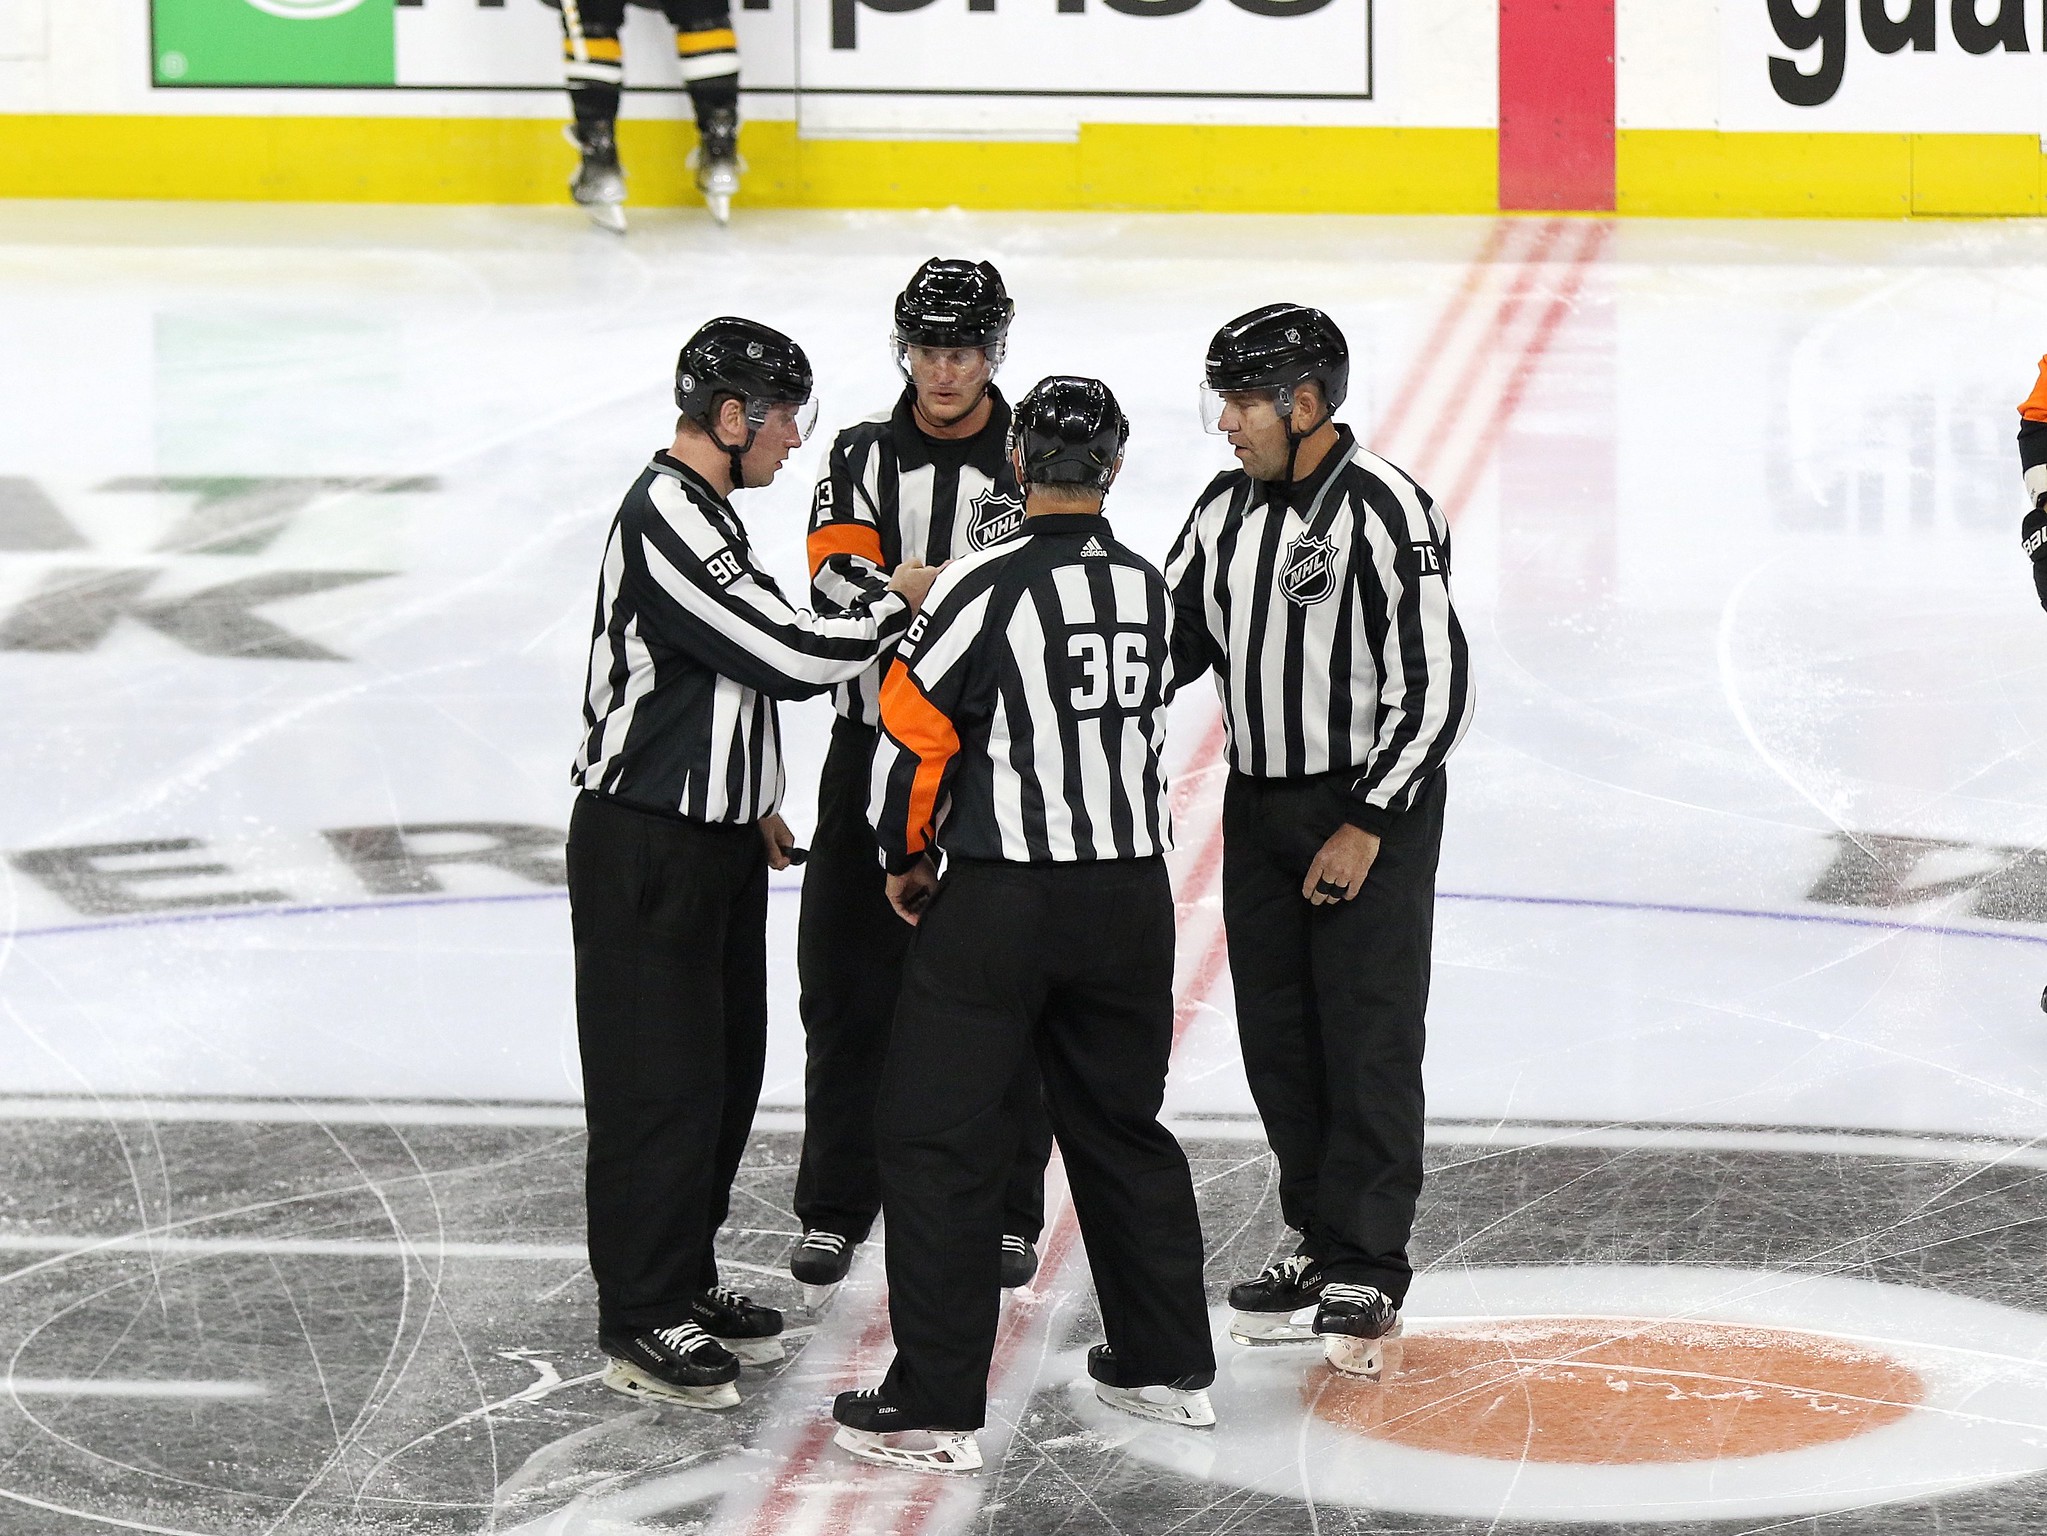 Referee Tim Peel's comments got him fired from NHL after long career